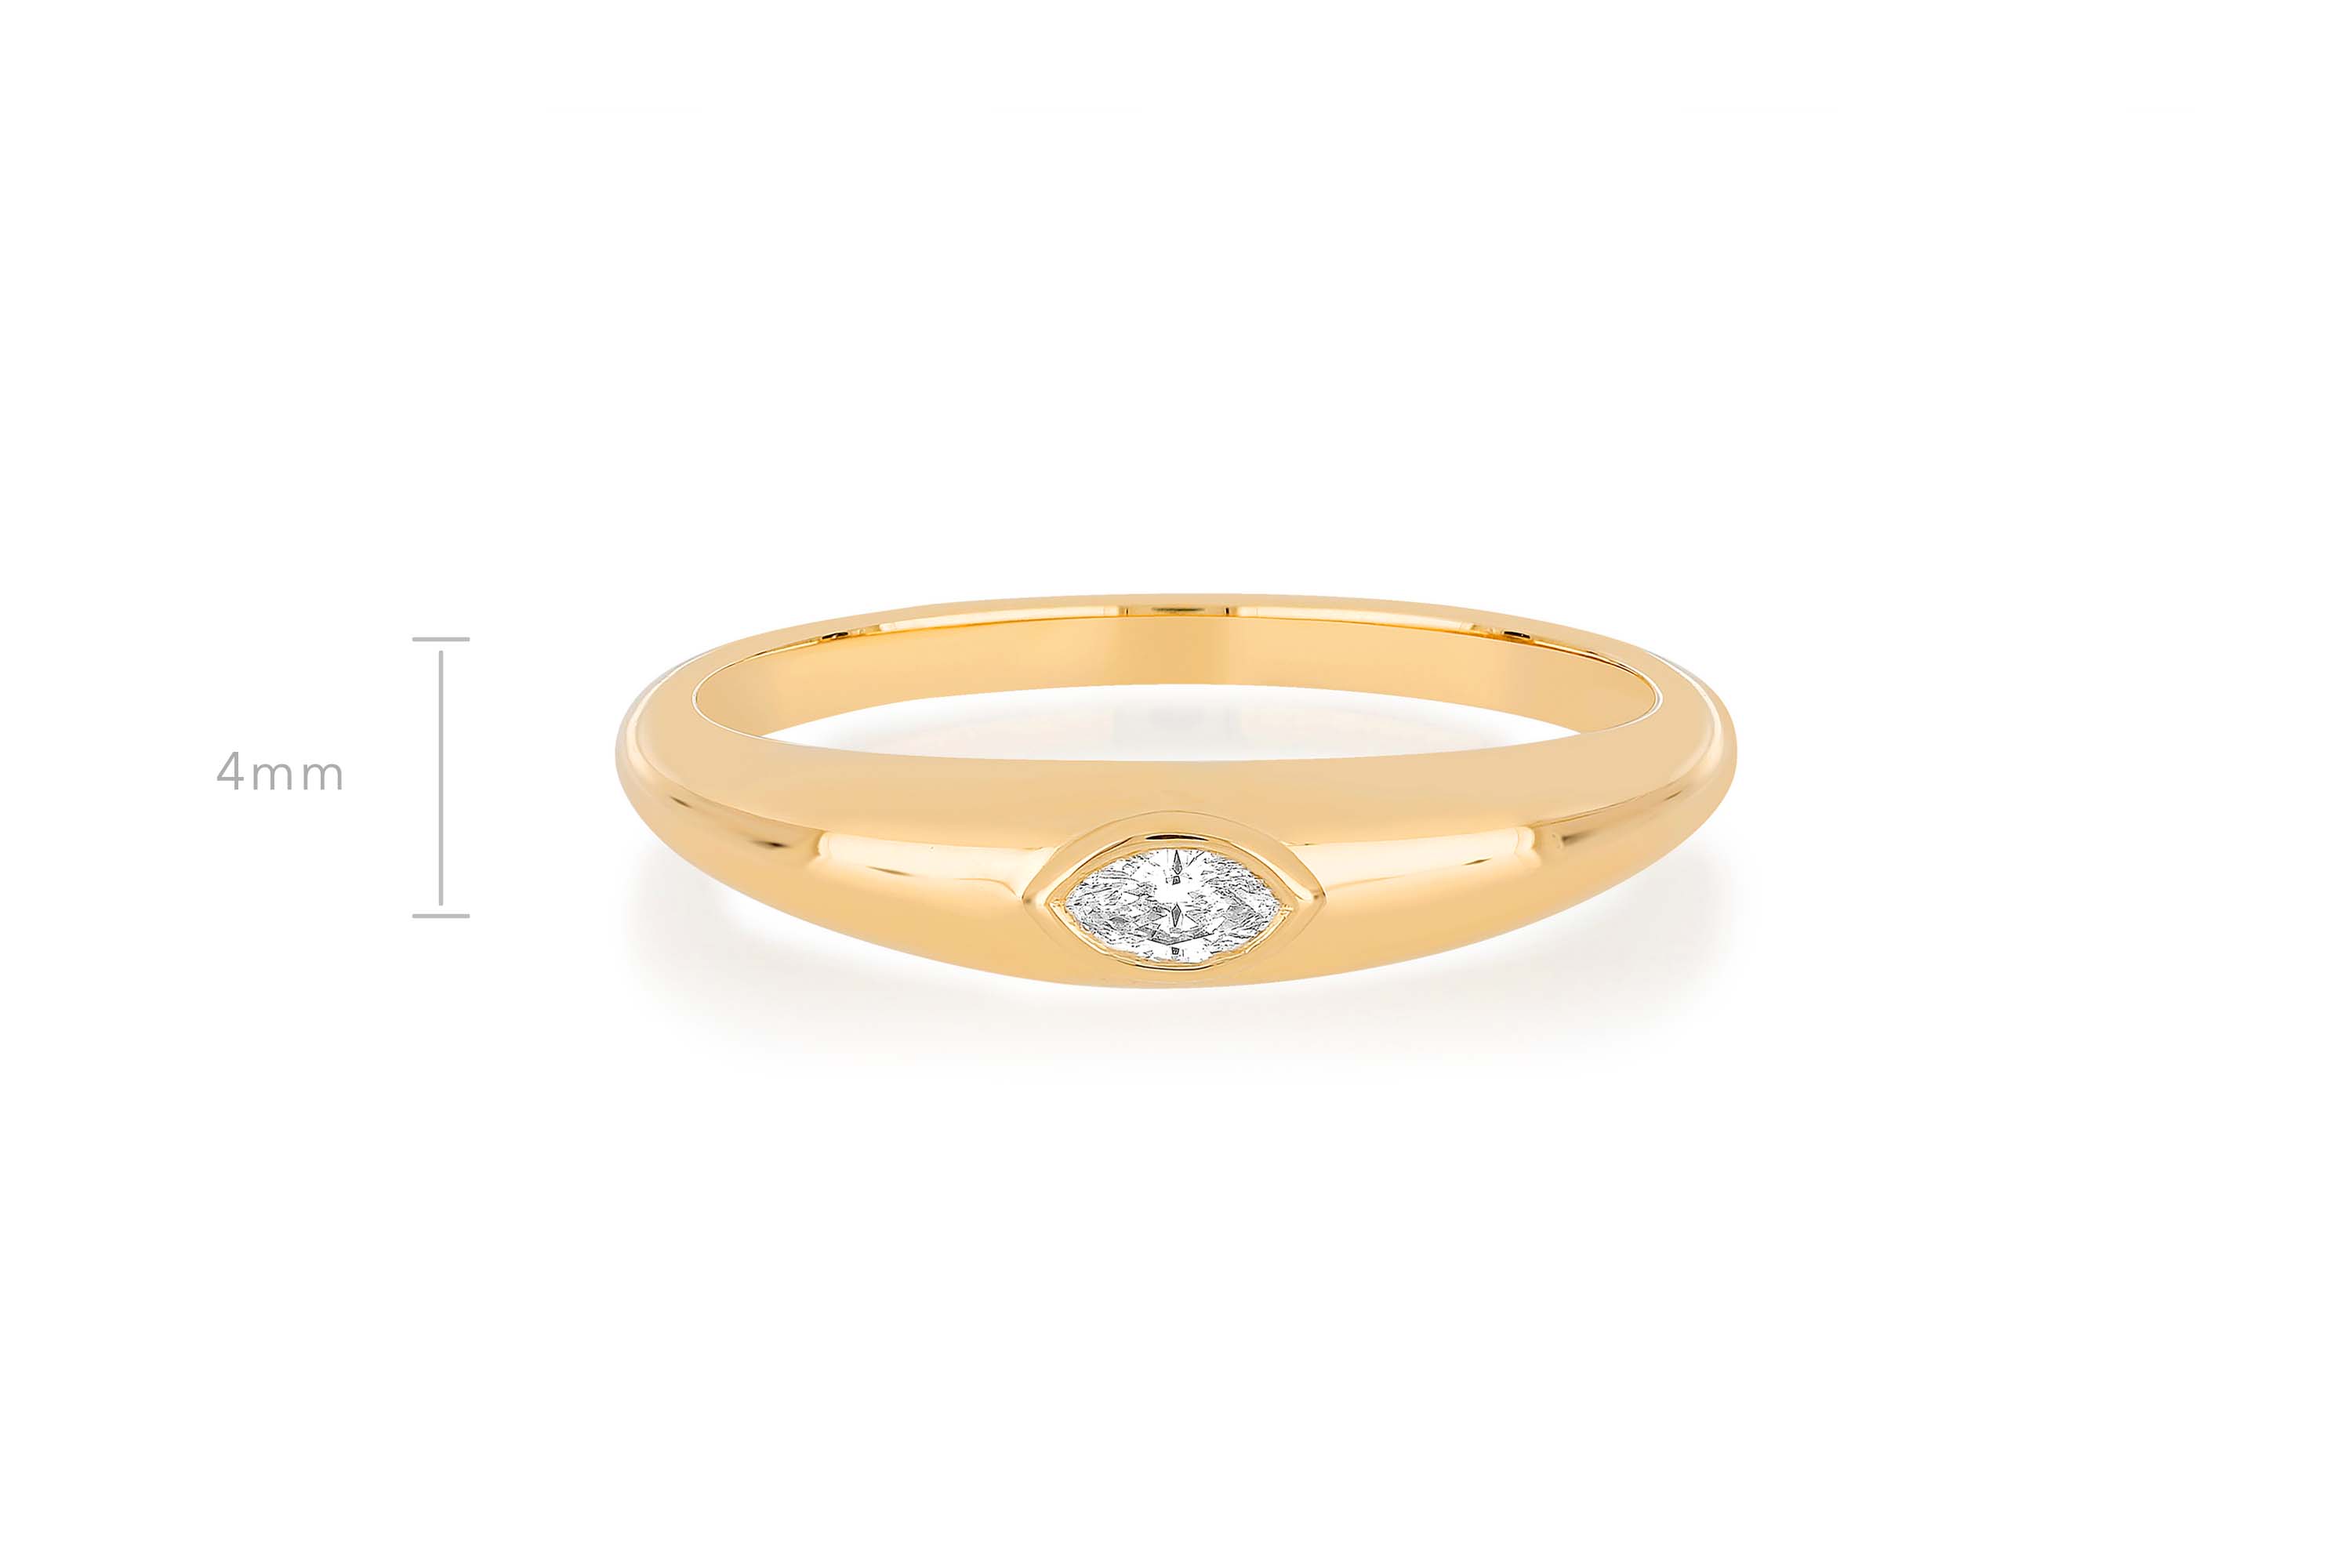 Gold Dome Ring With Diamond Marquise Center in 14k yellow gold with size measurement of 4mm in height